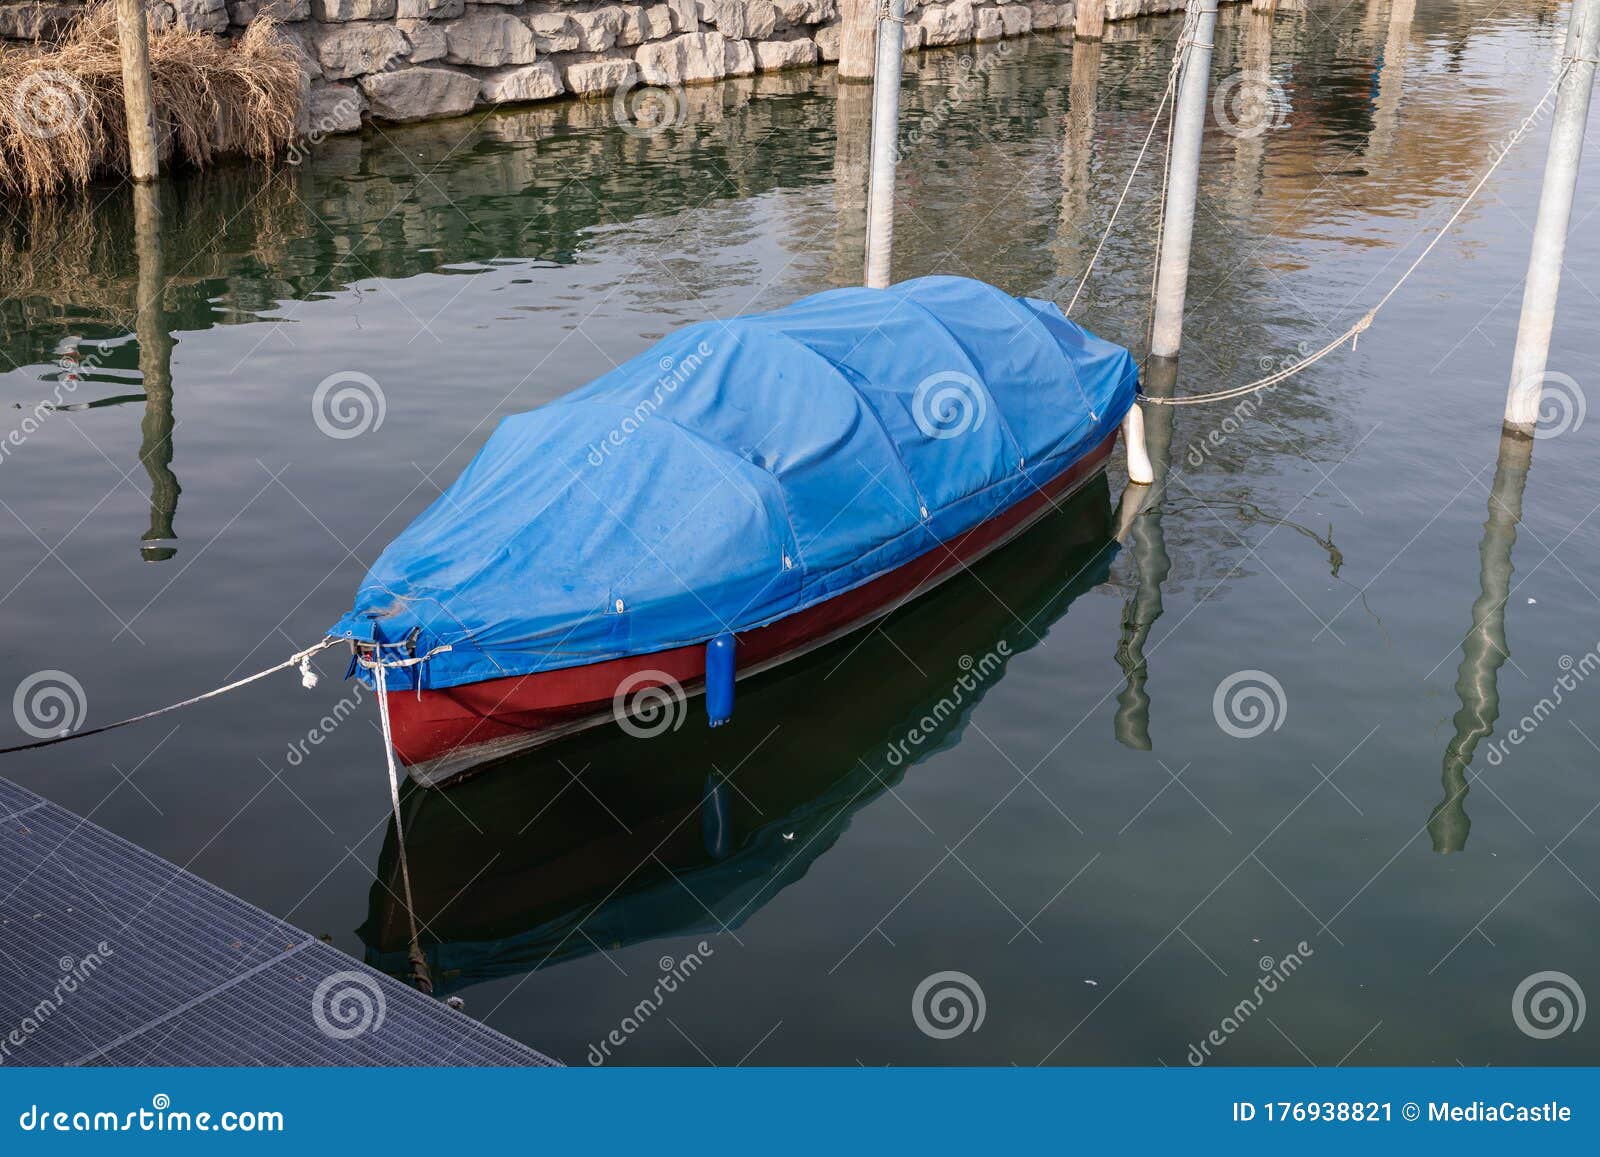 https://thumbs.dreamstime.com/z/red-fishing-boat-turquoise-water-blue-cover-sunset-day-176938821.jpg